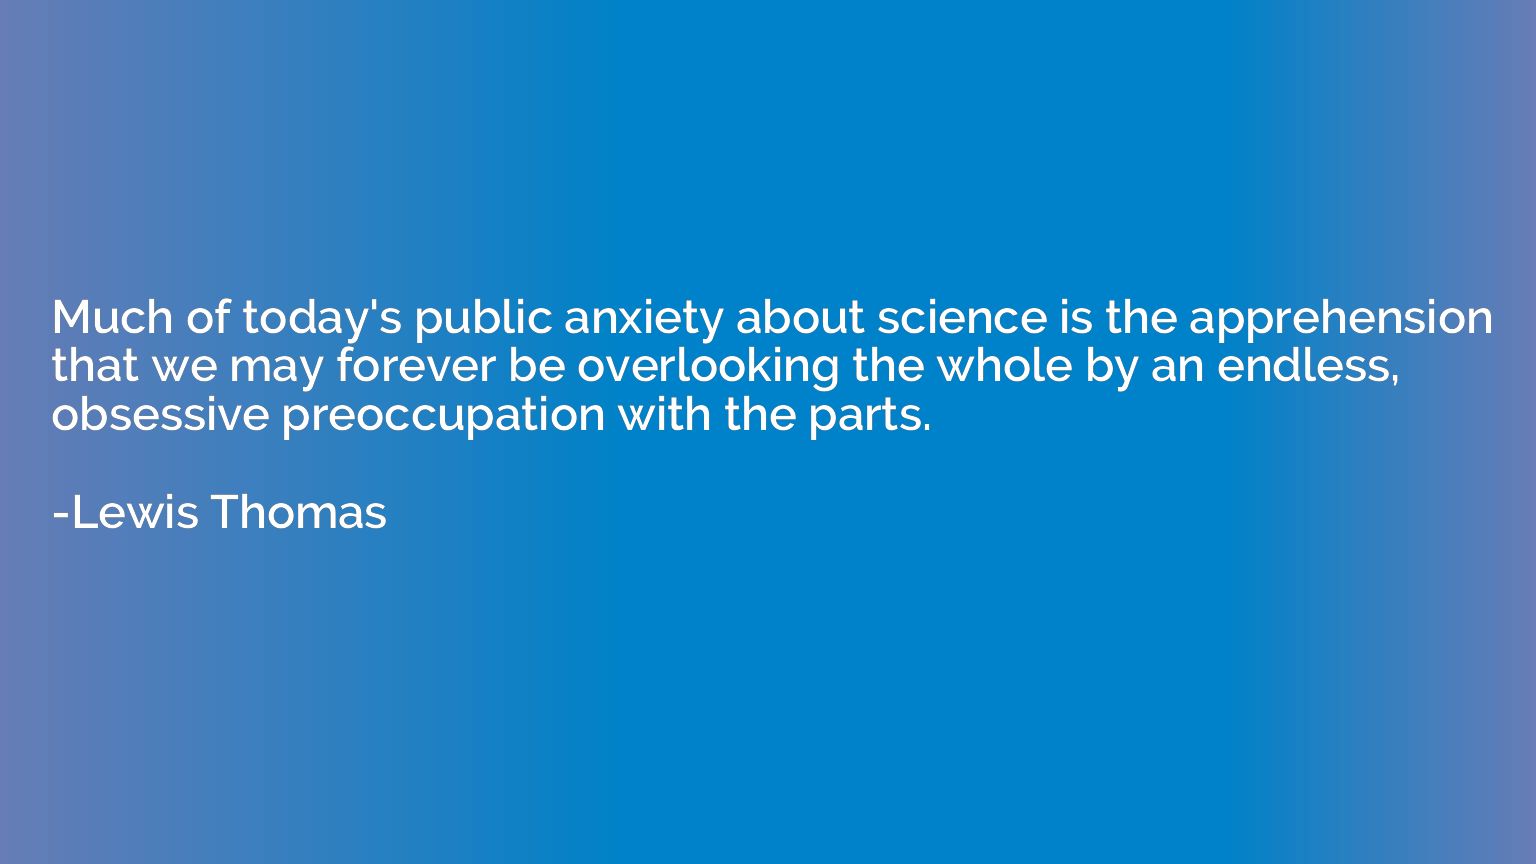 Much of today's public anxiety about science is the apprehen